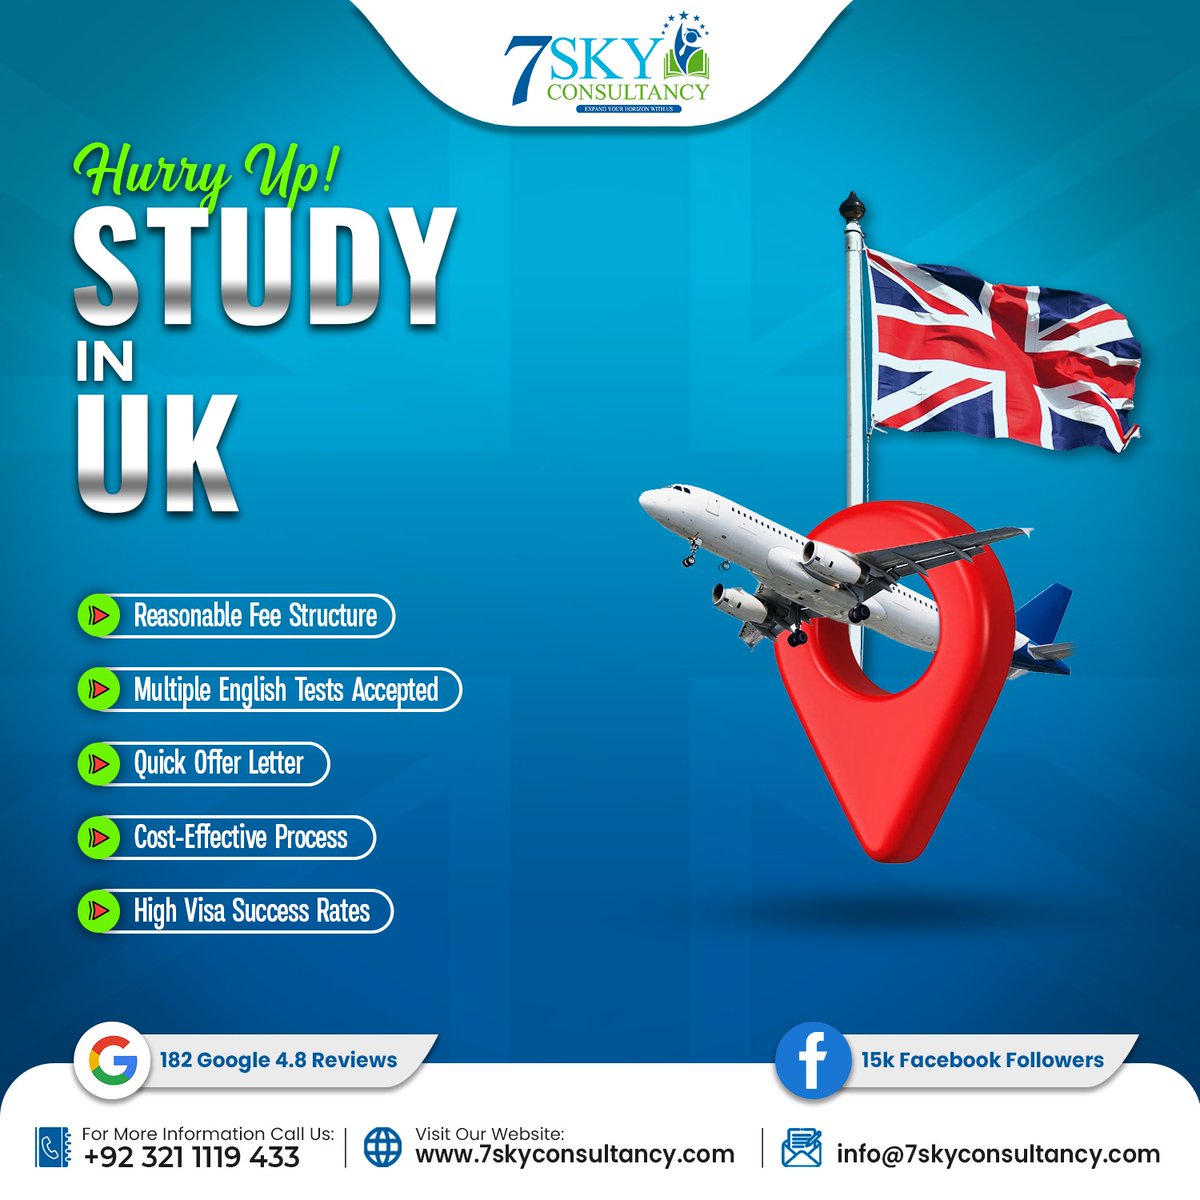 🇬🇧 Pursue your UK dreams for a Bachelor & Master! ✅ Multiple English tests accepted. ✅ Scholarships available. ✅ Easy application process. ✅ Low initial deposit & quick offer letter. ✅ Work opportunities & multiple intakes. Get #FREE Consultation. 7skyconsultancy.com/apply-now.php